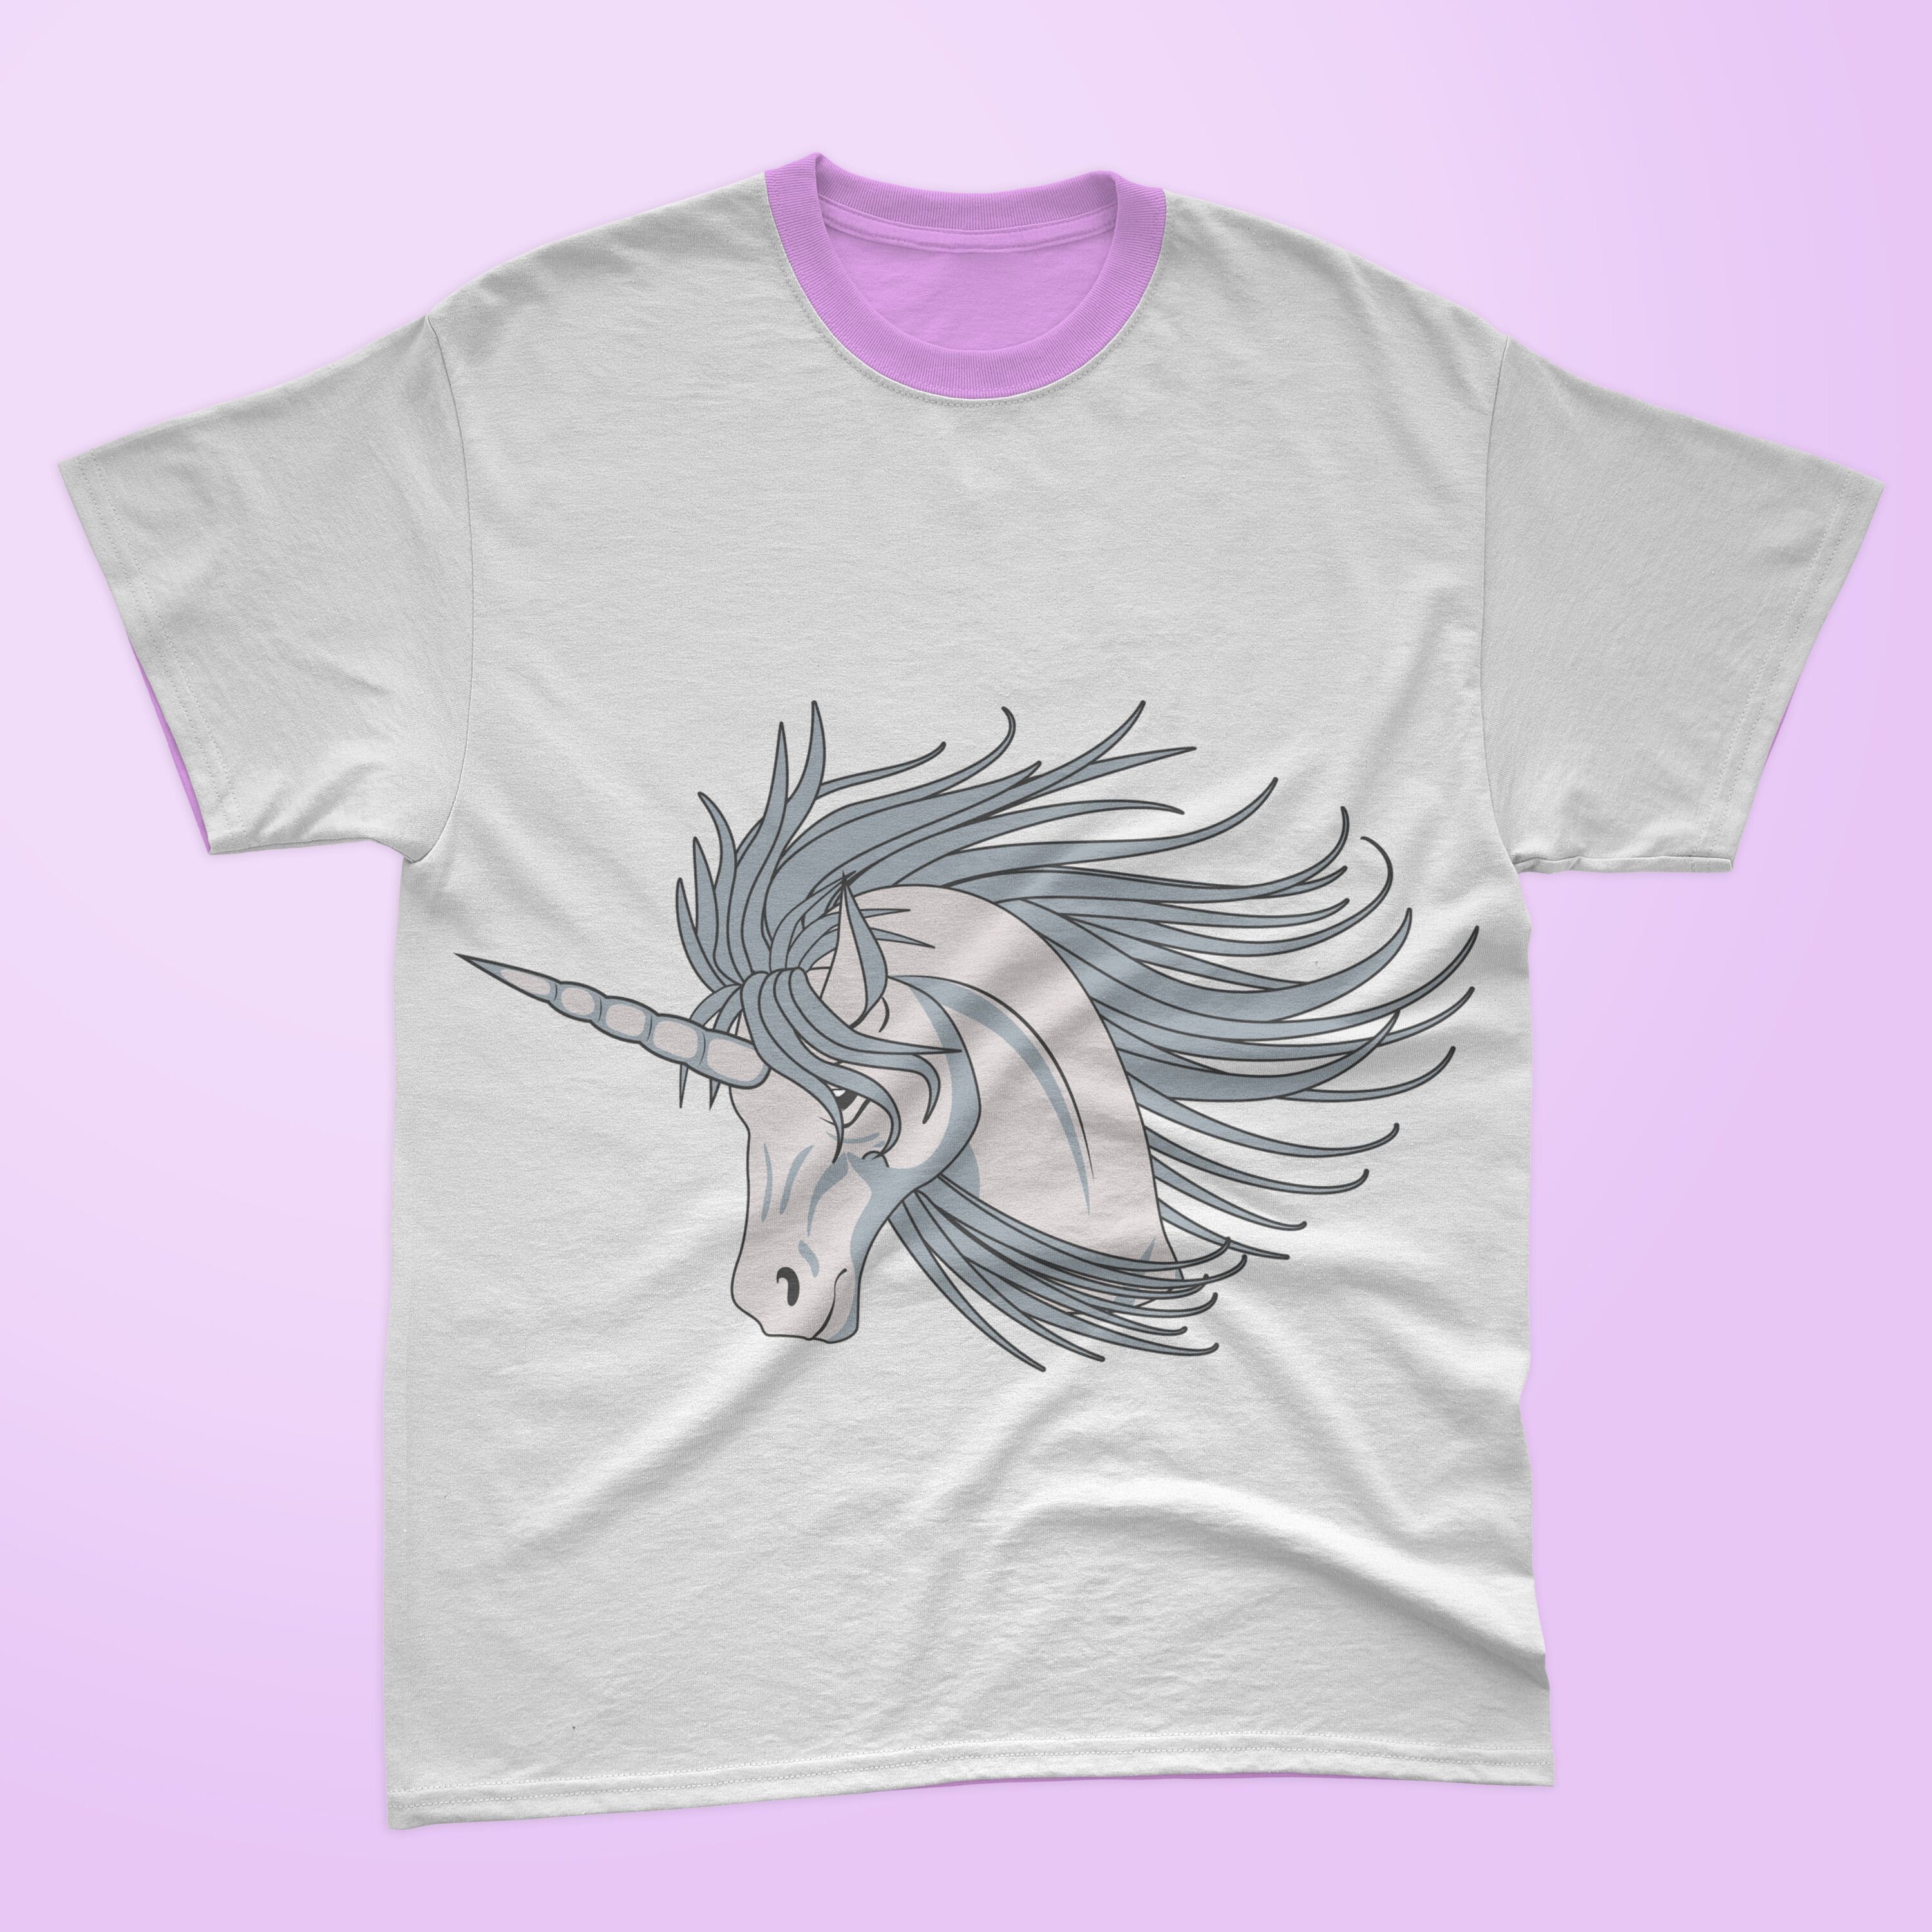 White t-shirt with a lavender collar and unicorn head on a lavender background.